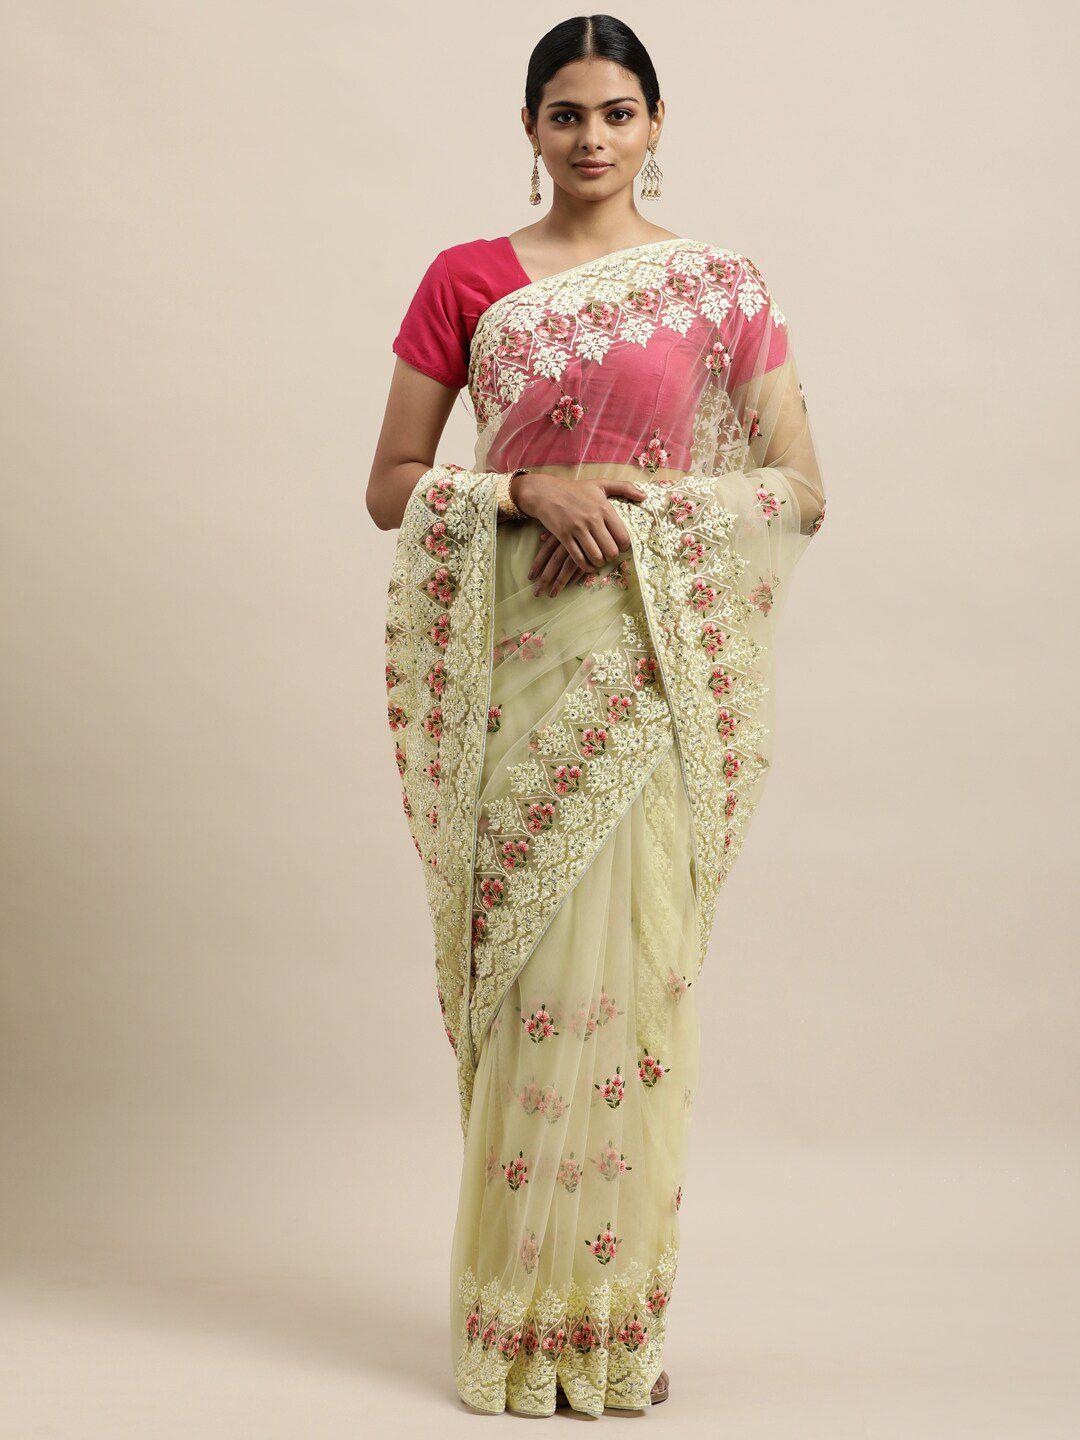 kasee-off-white-floral-embroidered-net-saree